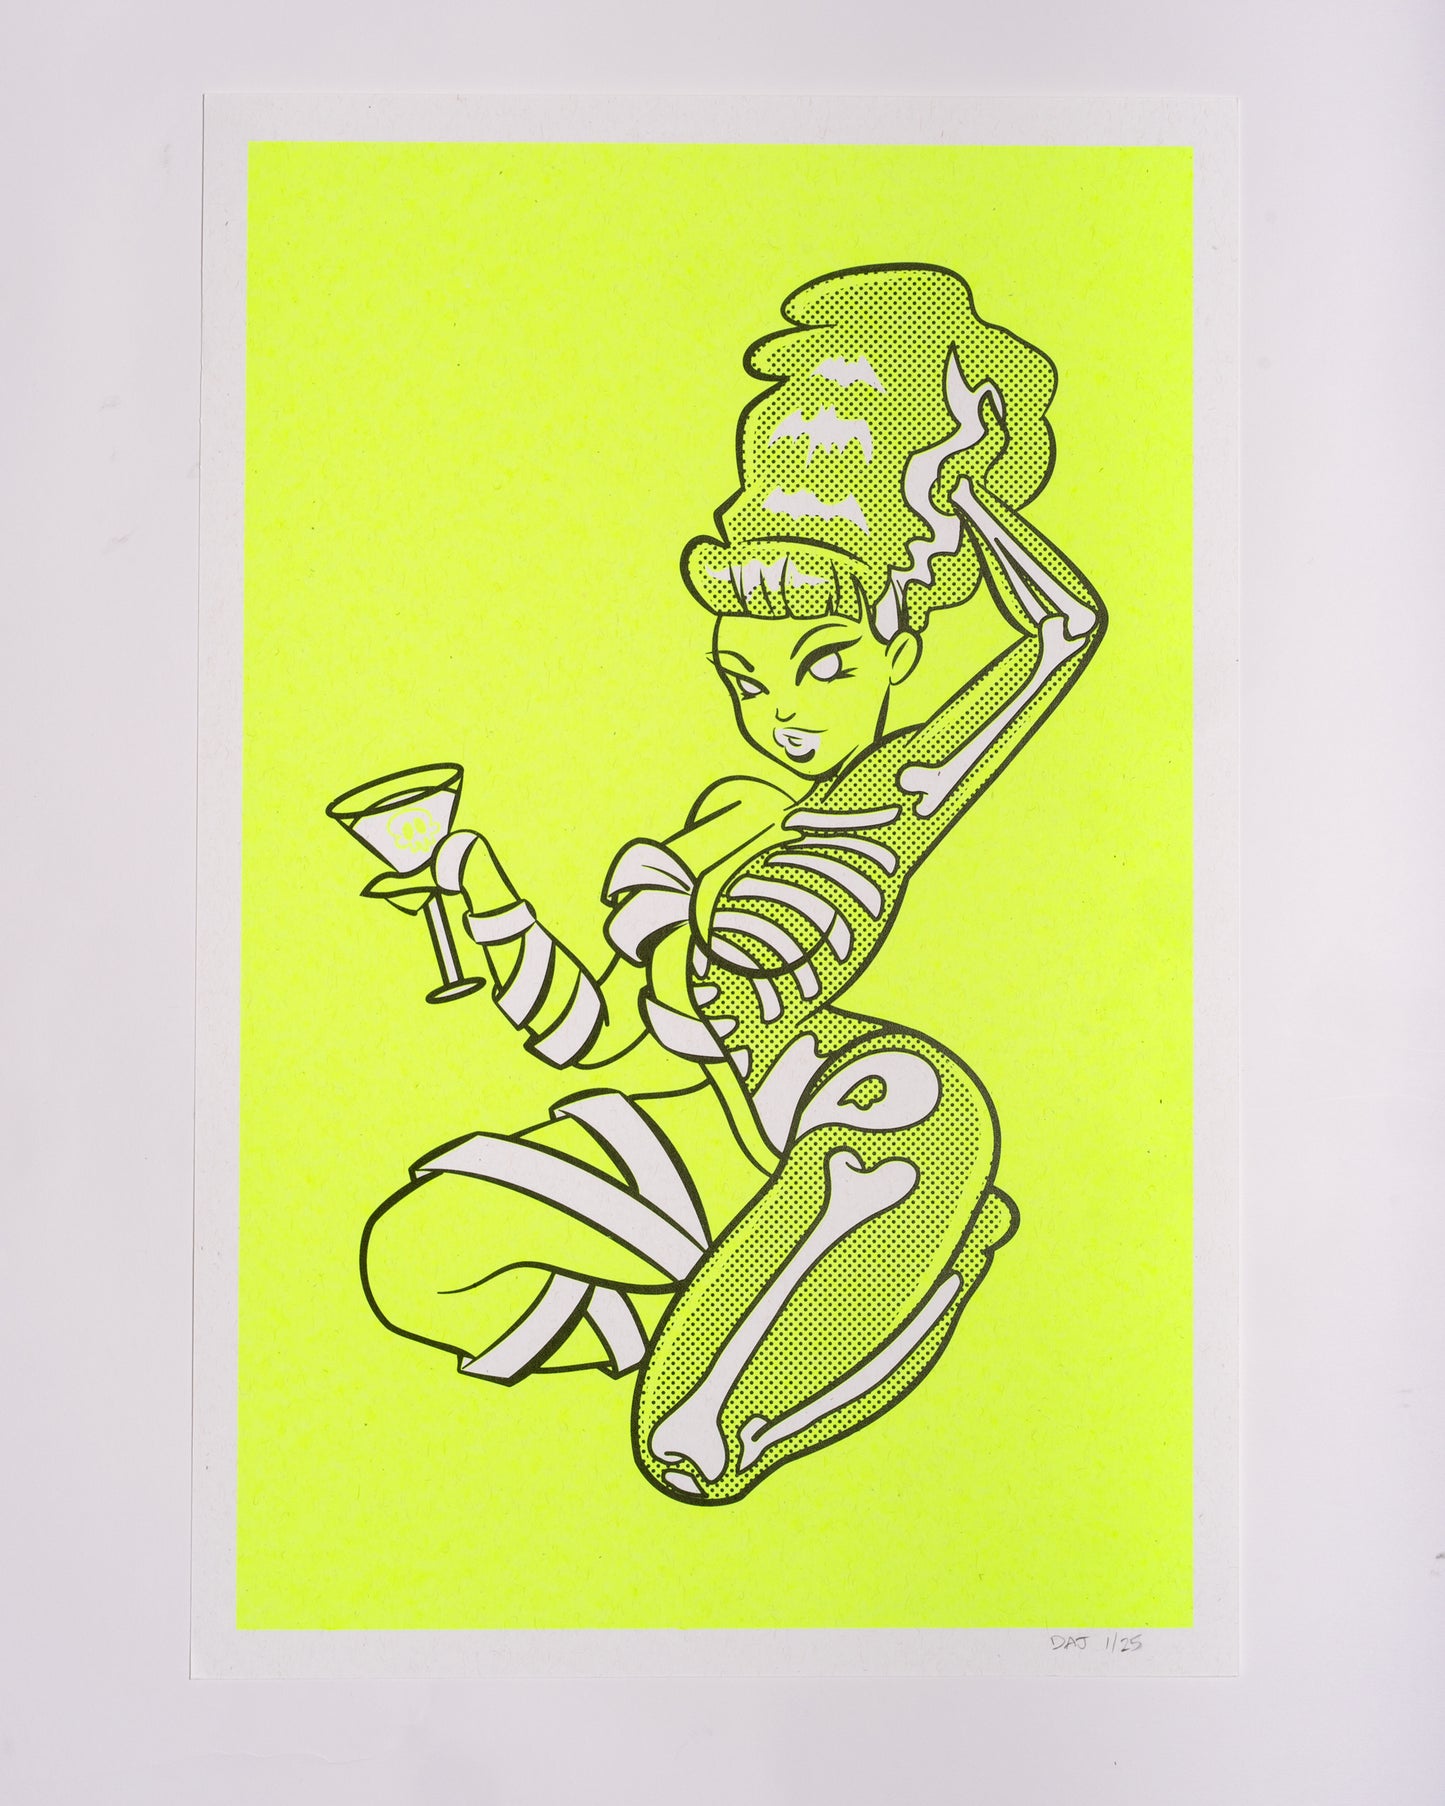 BRIDE BONES© ELECTRIC LIME SCREEN PRINTED POSTER 12.5 x 19 inches